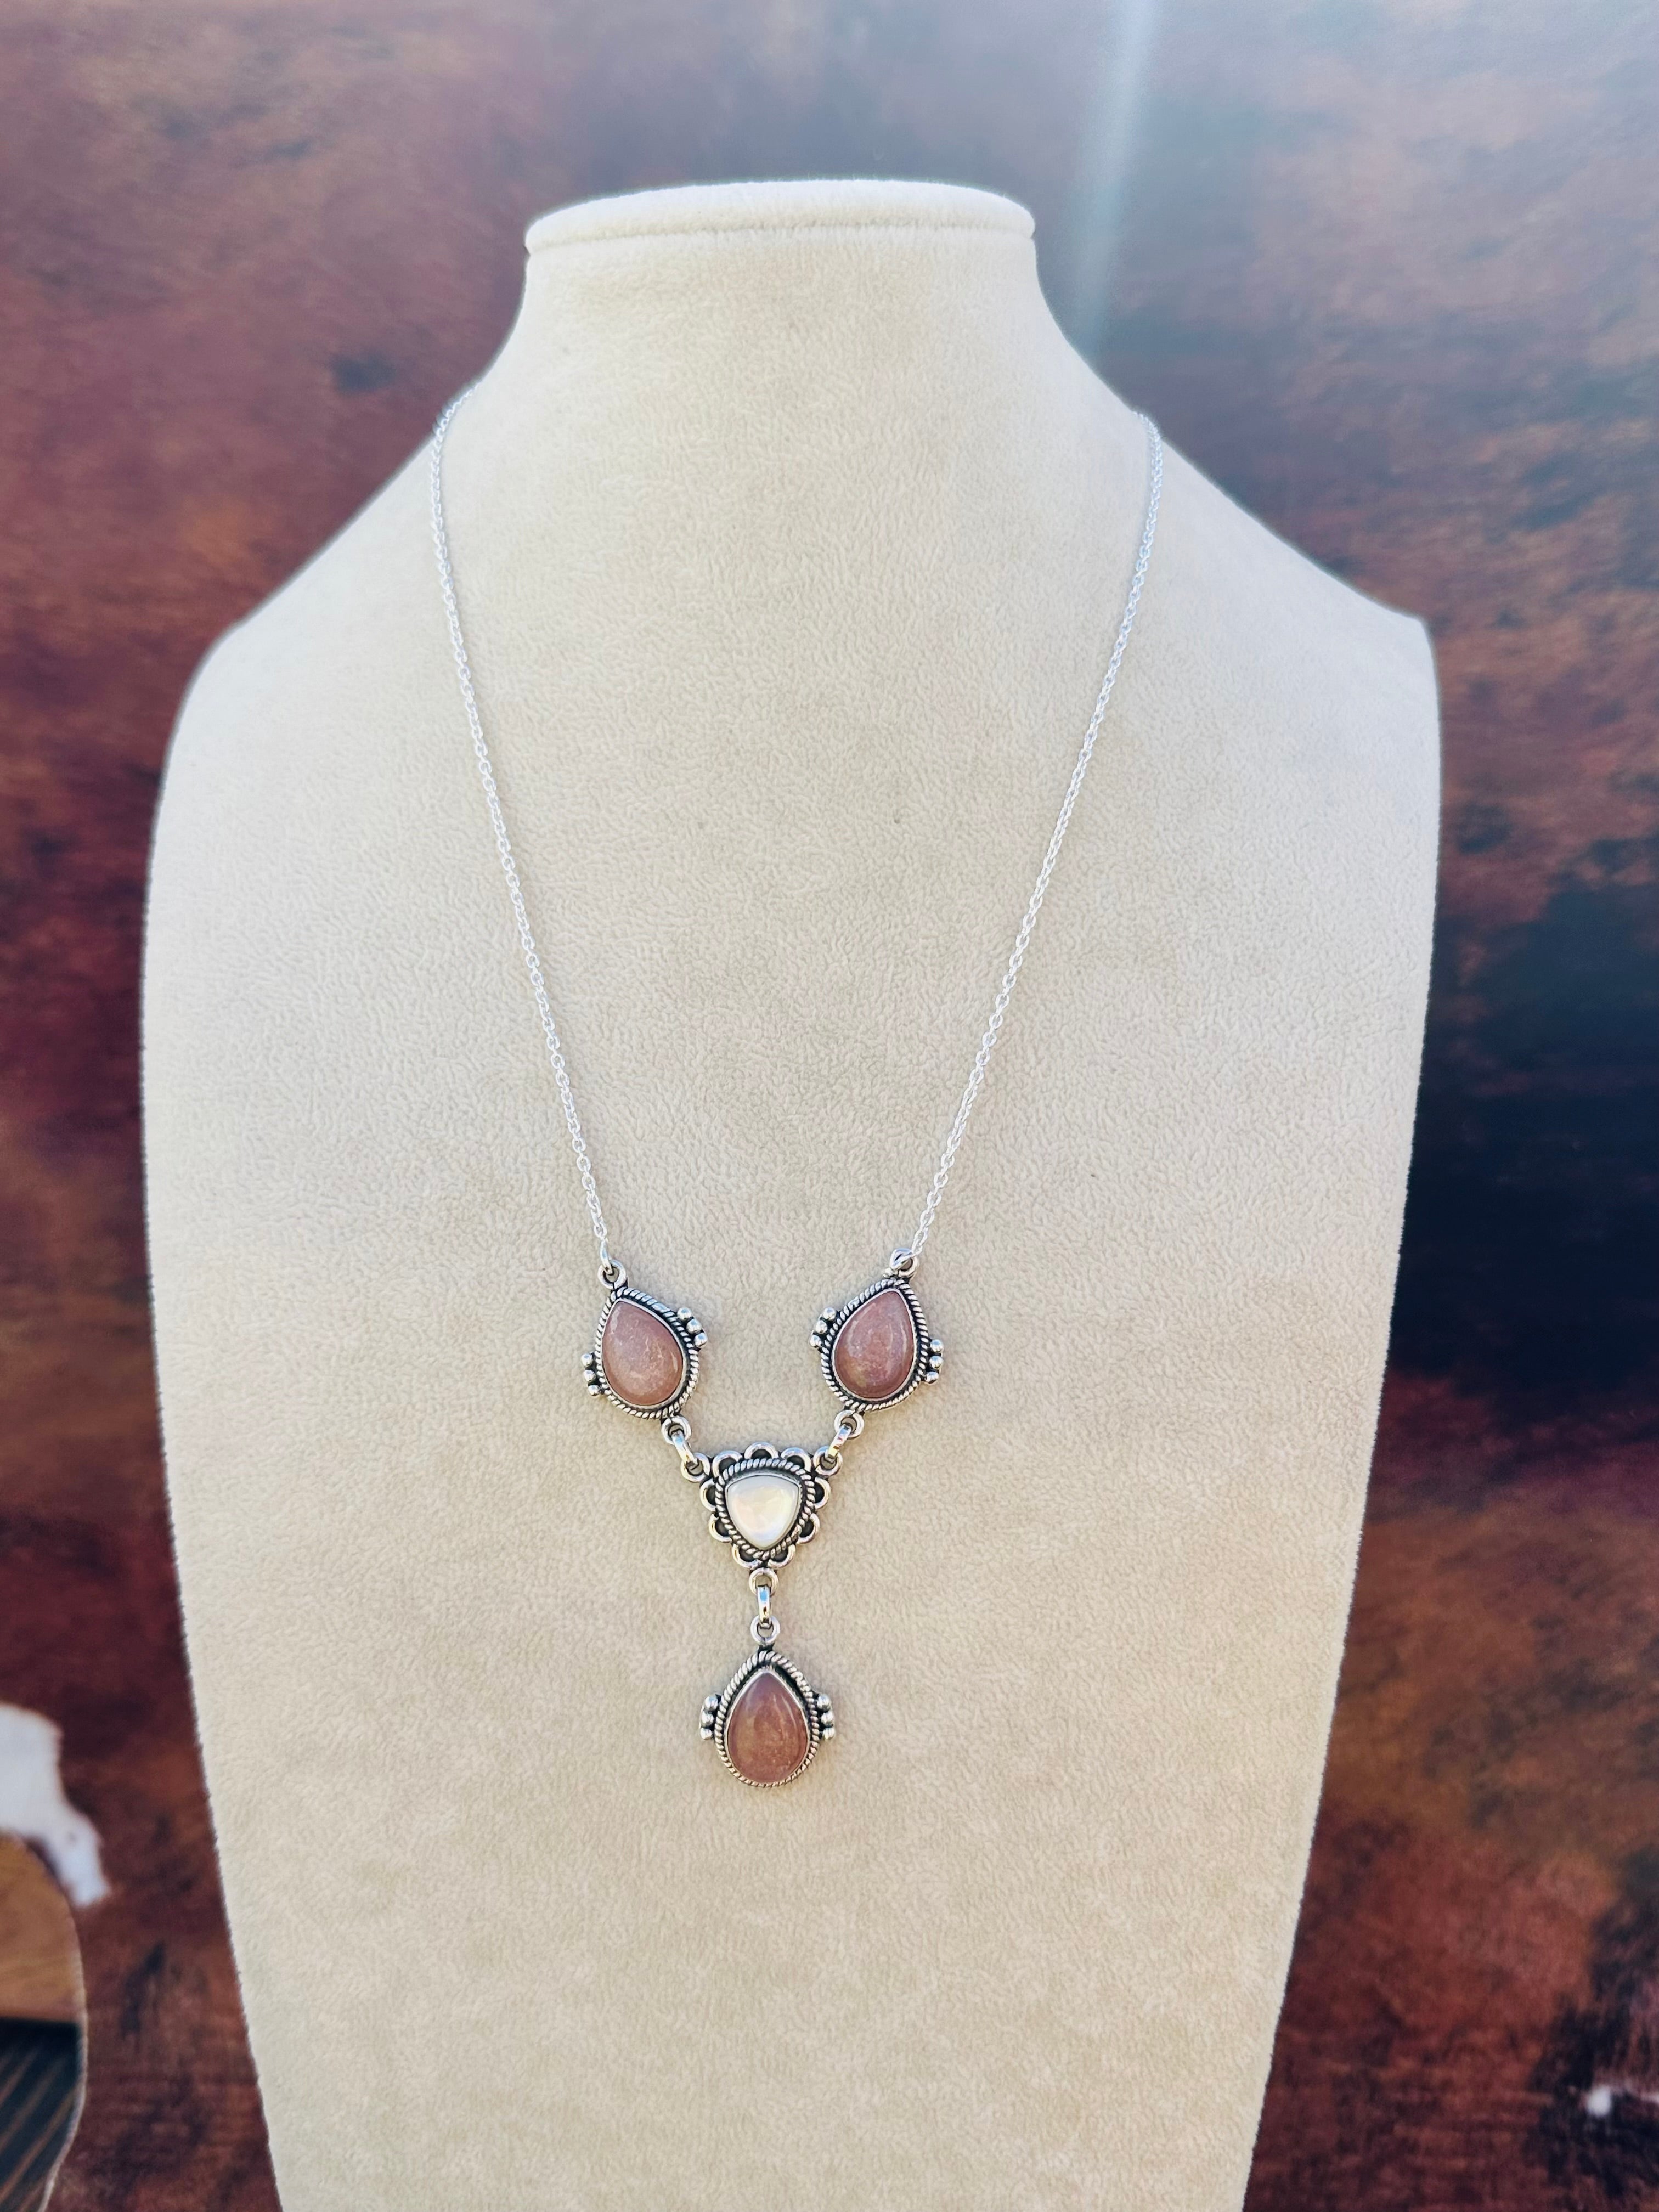 Southwest Handmade Multi Stone & Sterling Silver Lariat Necklace